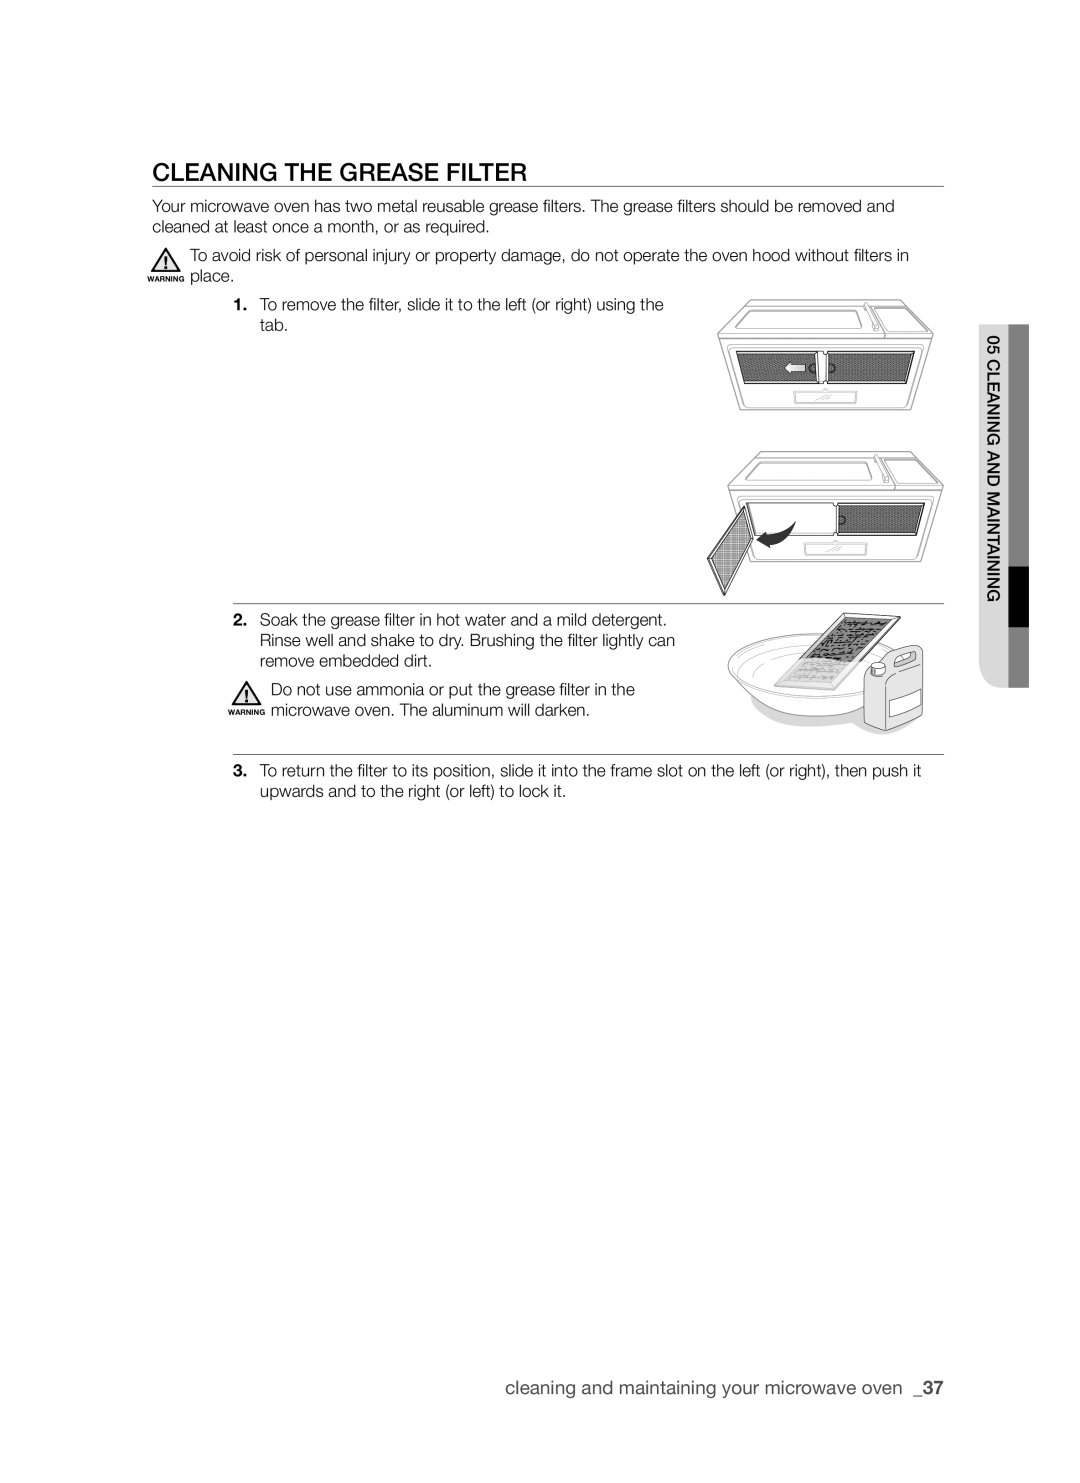 Samsung SMH7185 user manual CLeAnIng The greASe FILTer, cleaning and maintaining your microwave oven  